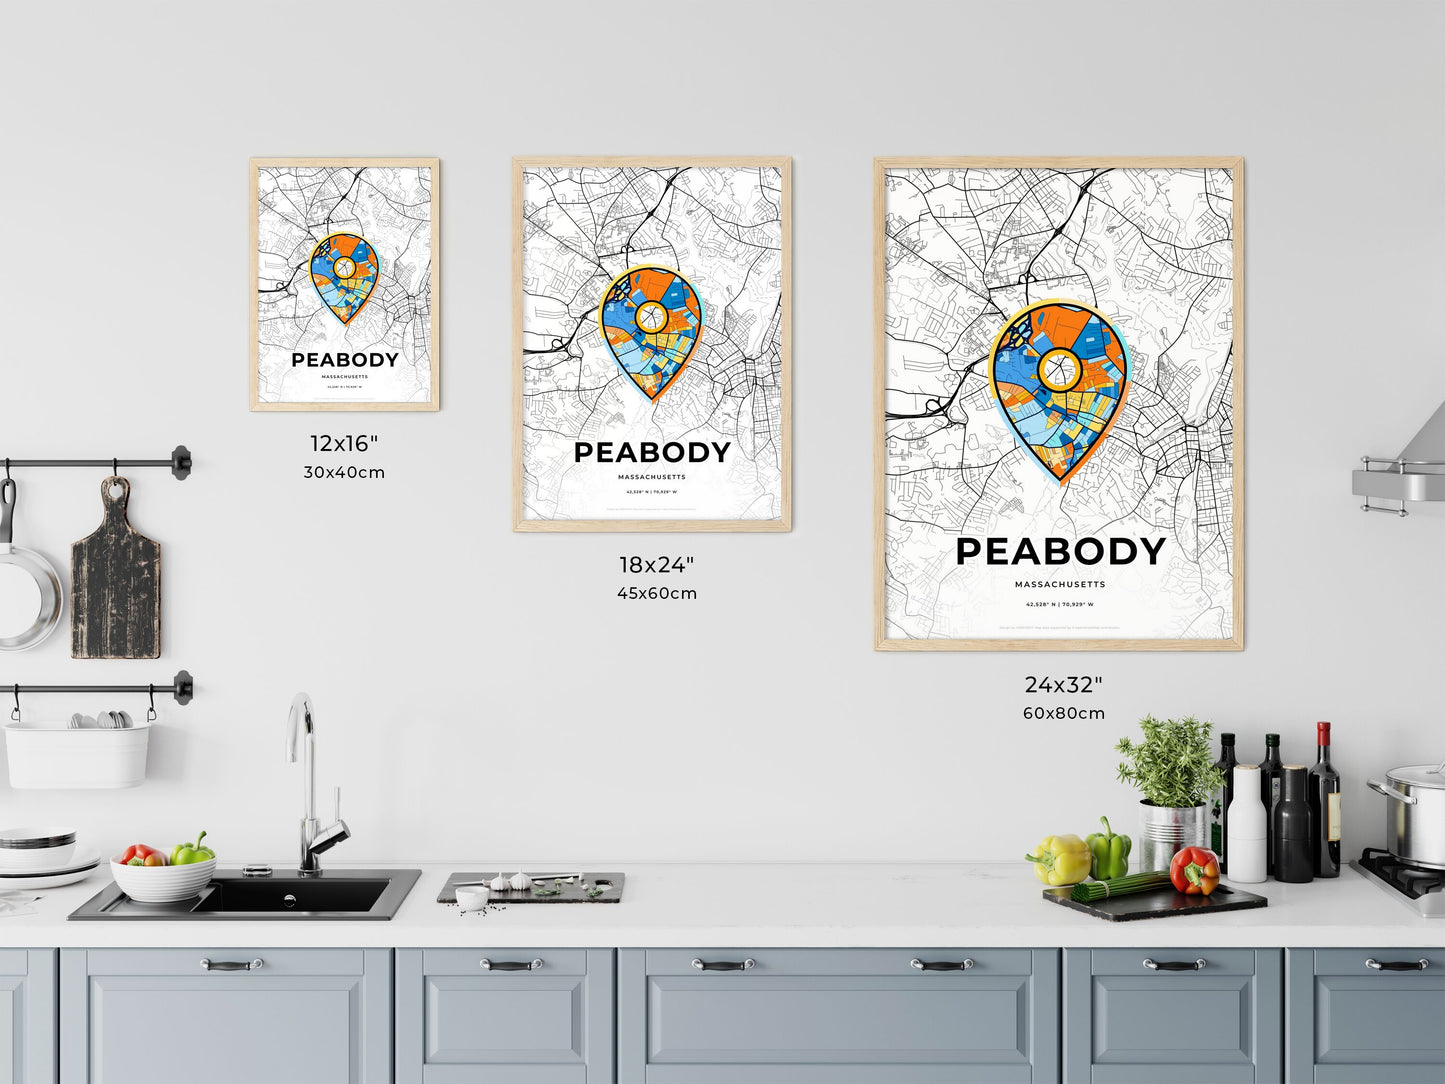 PEABODY MASSACHUSETTS minimal art map with a colorful icon.